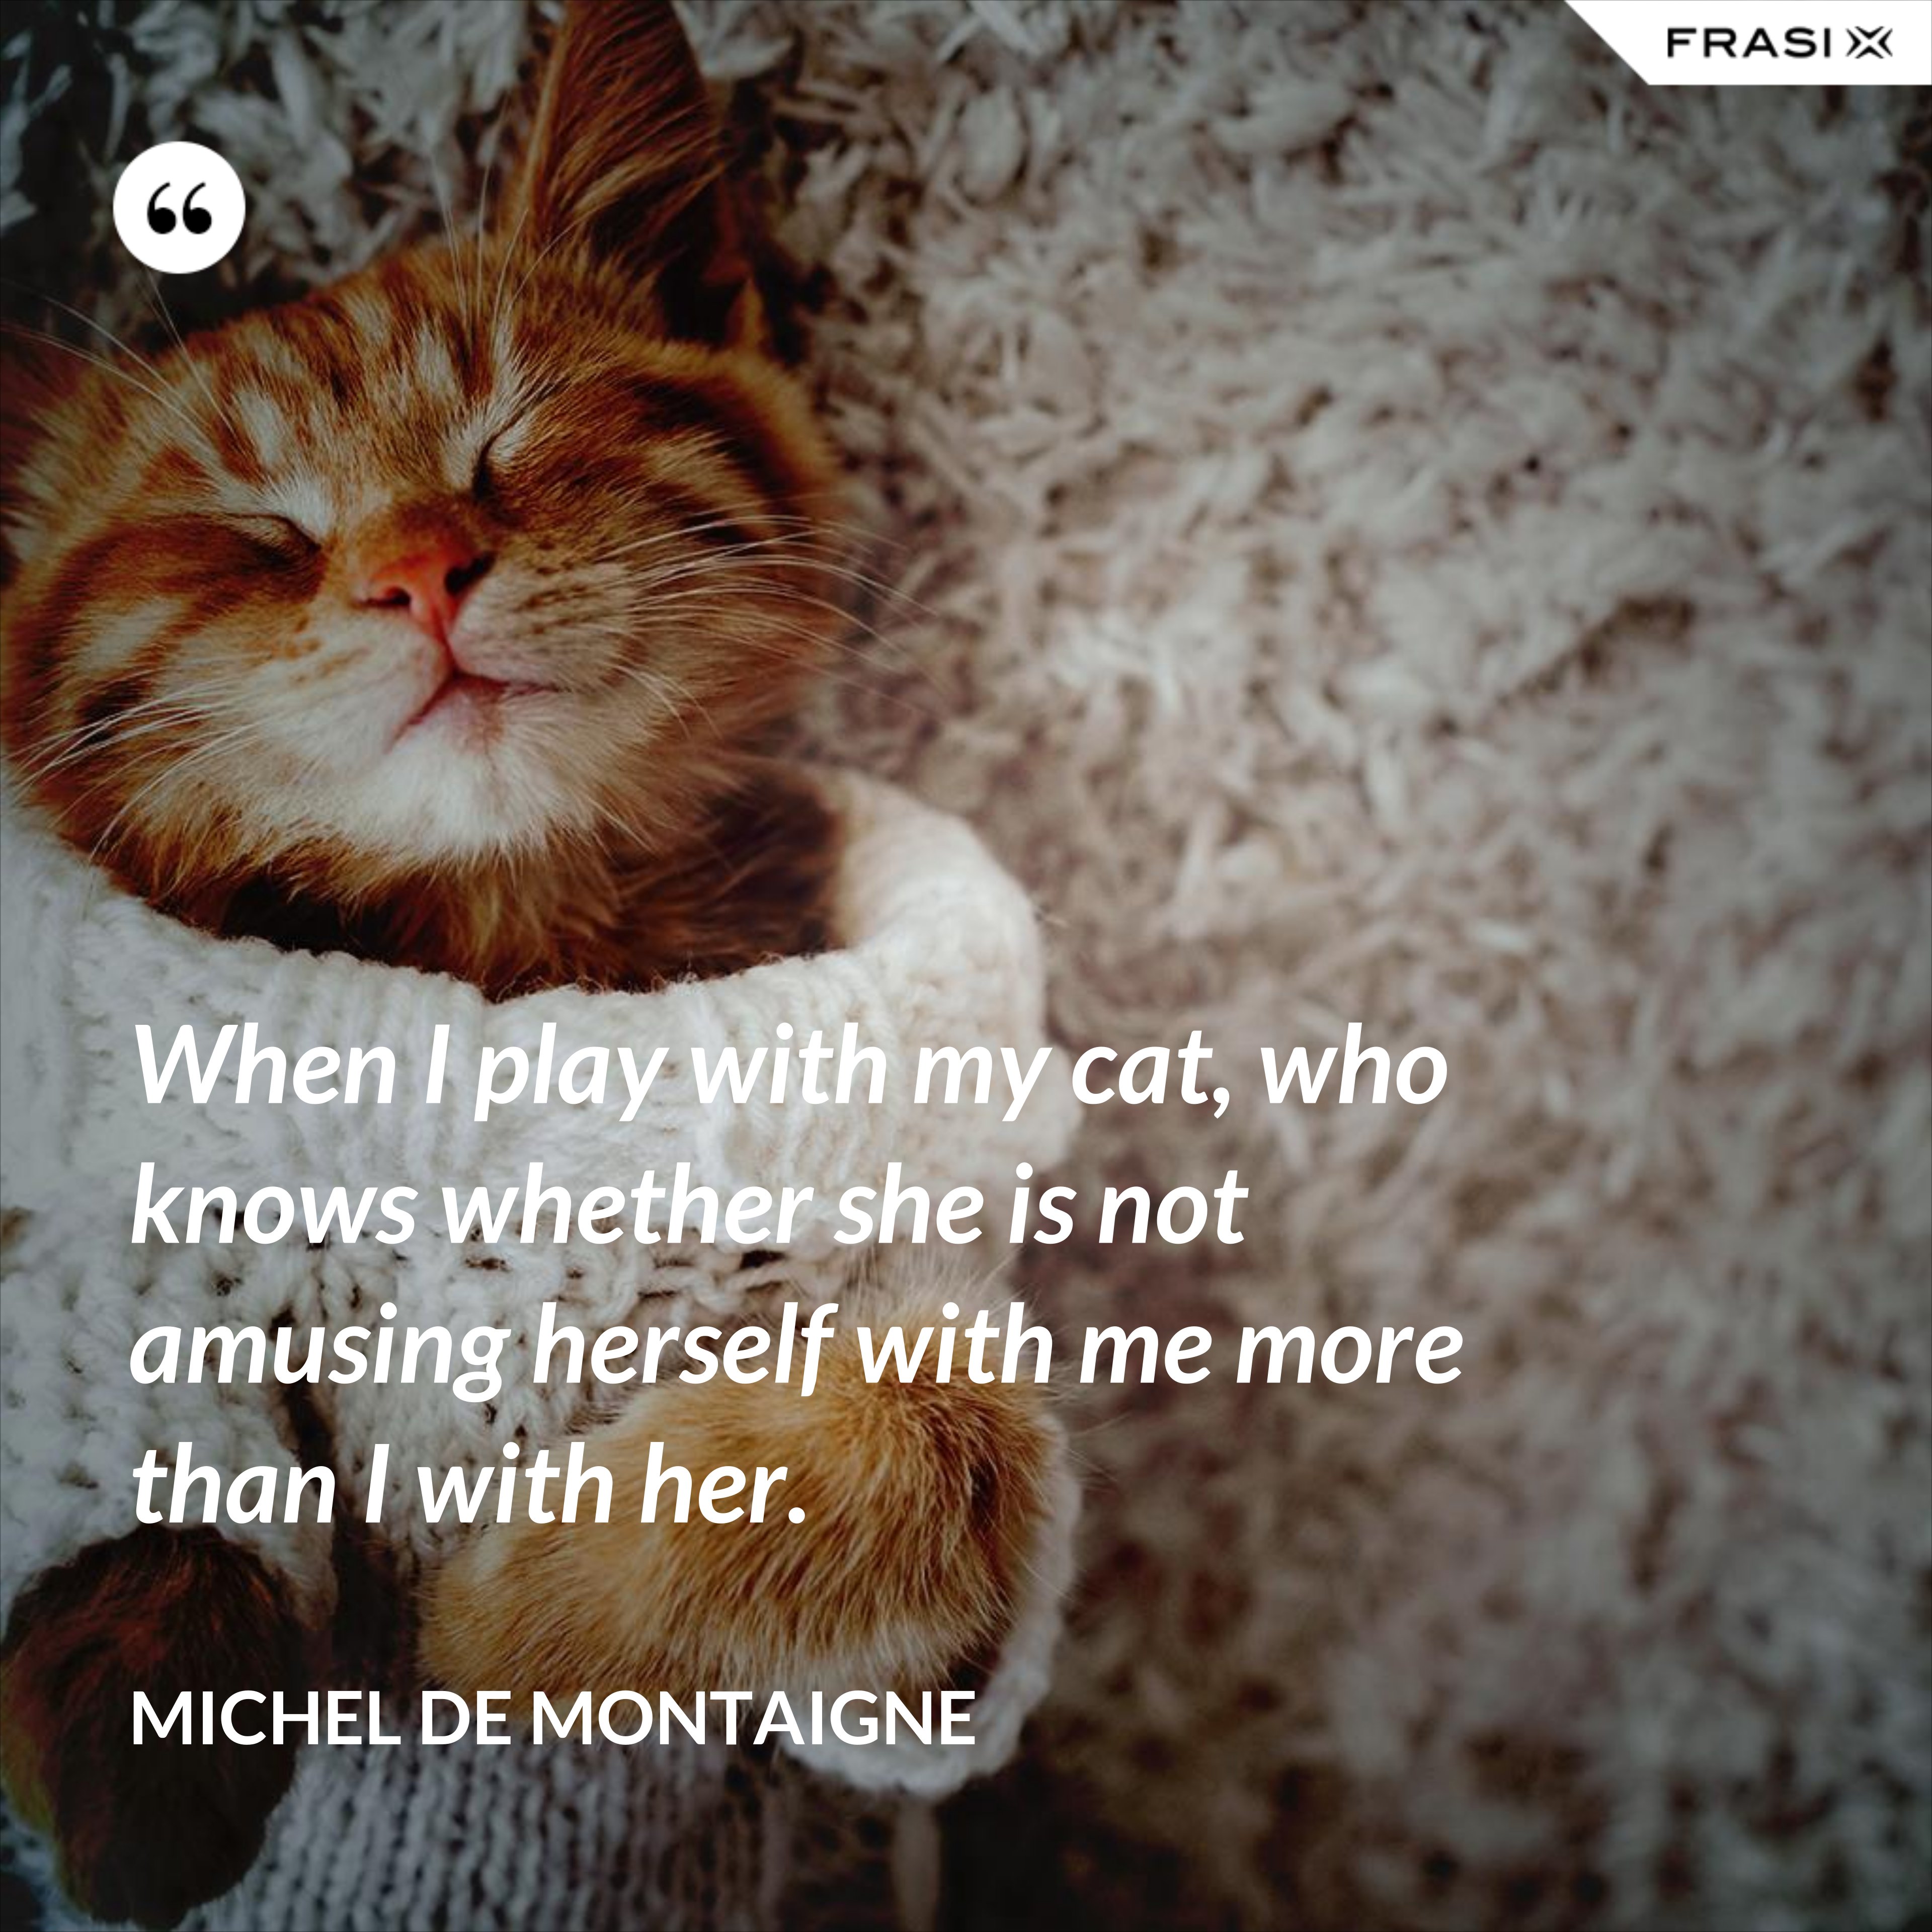 When I play with my cat, who knows whether she is not amusing herself with me more than I with her. - Michel de Montaigne